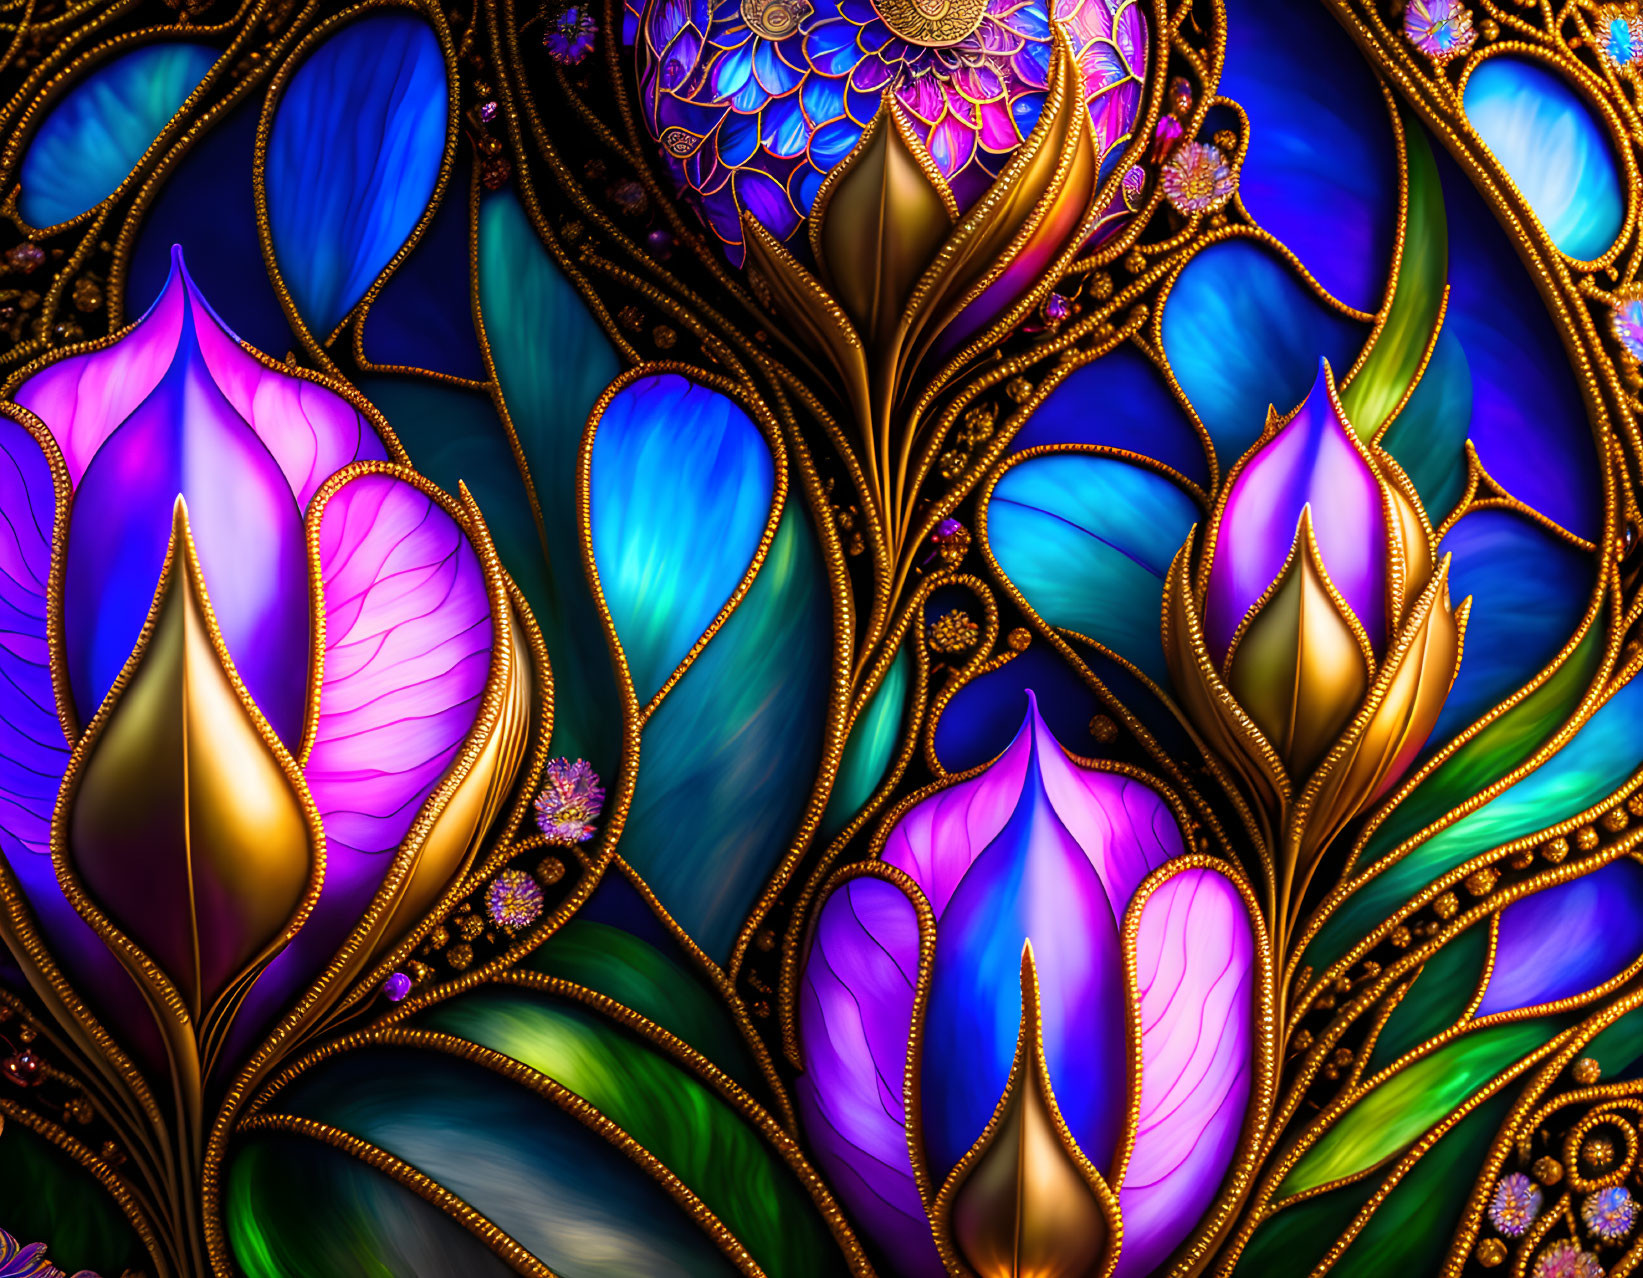 Colorful Stained Glass Style Design with Purple, Blue, and Gold Floral Patterns